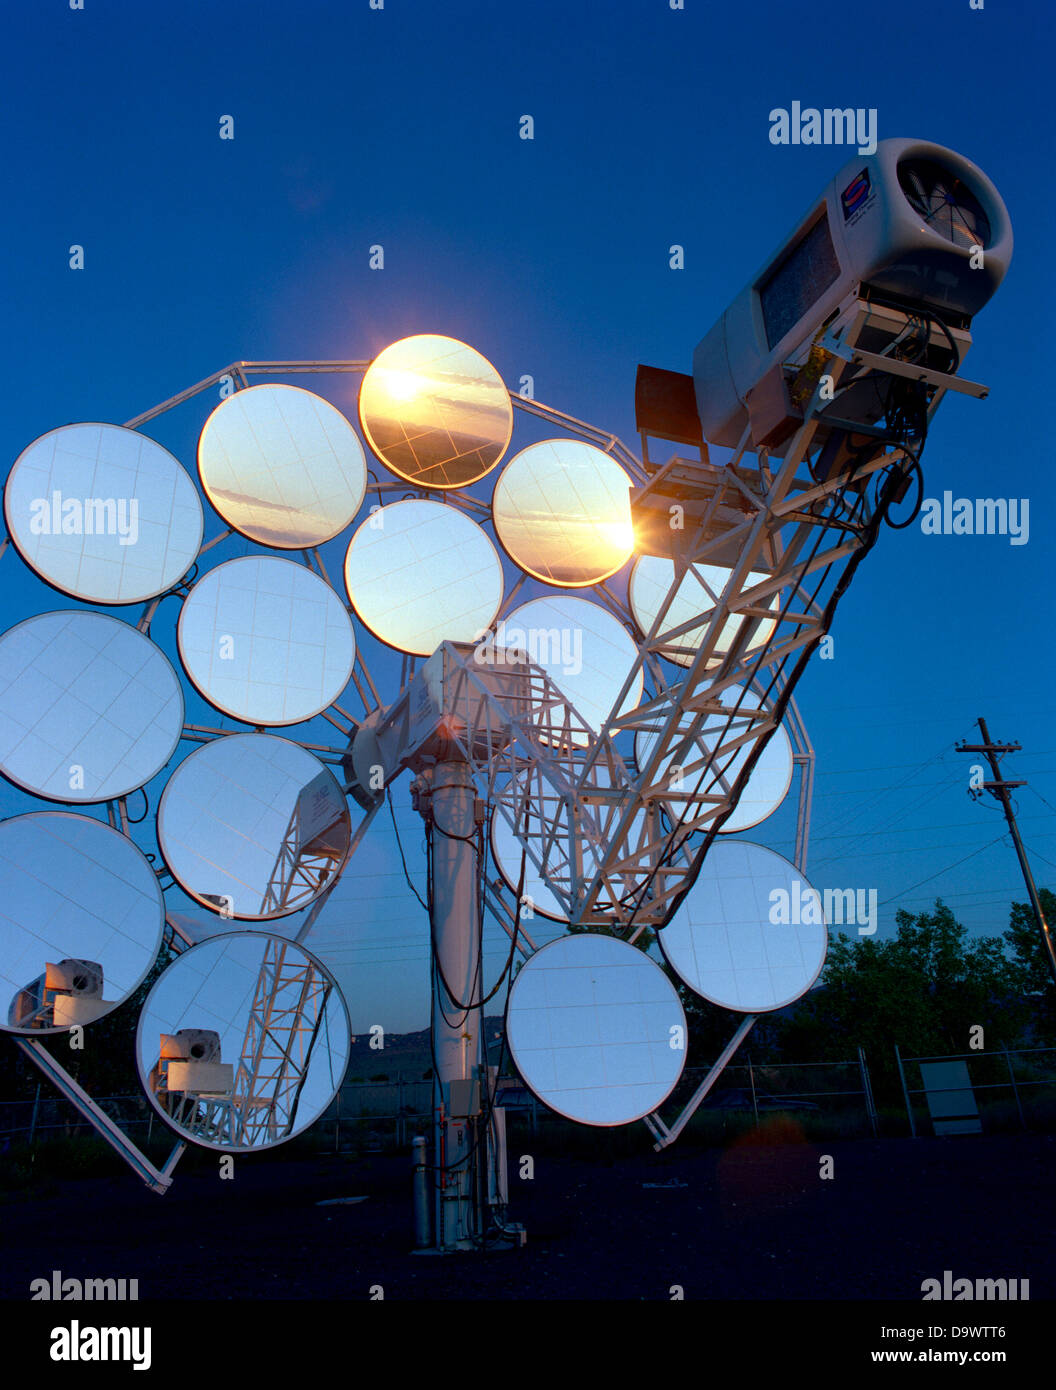 Stirling Solar power systems solar dish engine June 12, 1996 in Golden,  Colorado. The dish produces electricity uses mirrors to focus sunlight onto  a thermal receiver. The heat is used to run